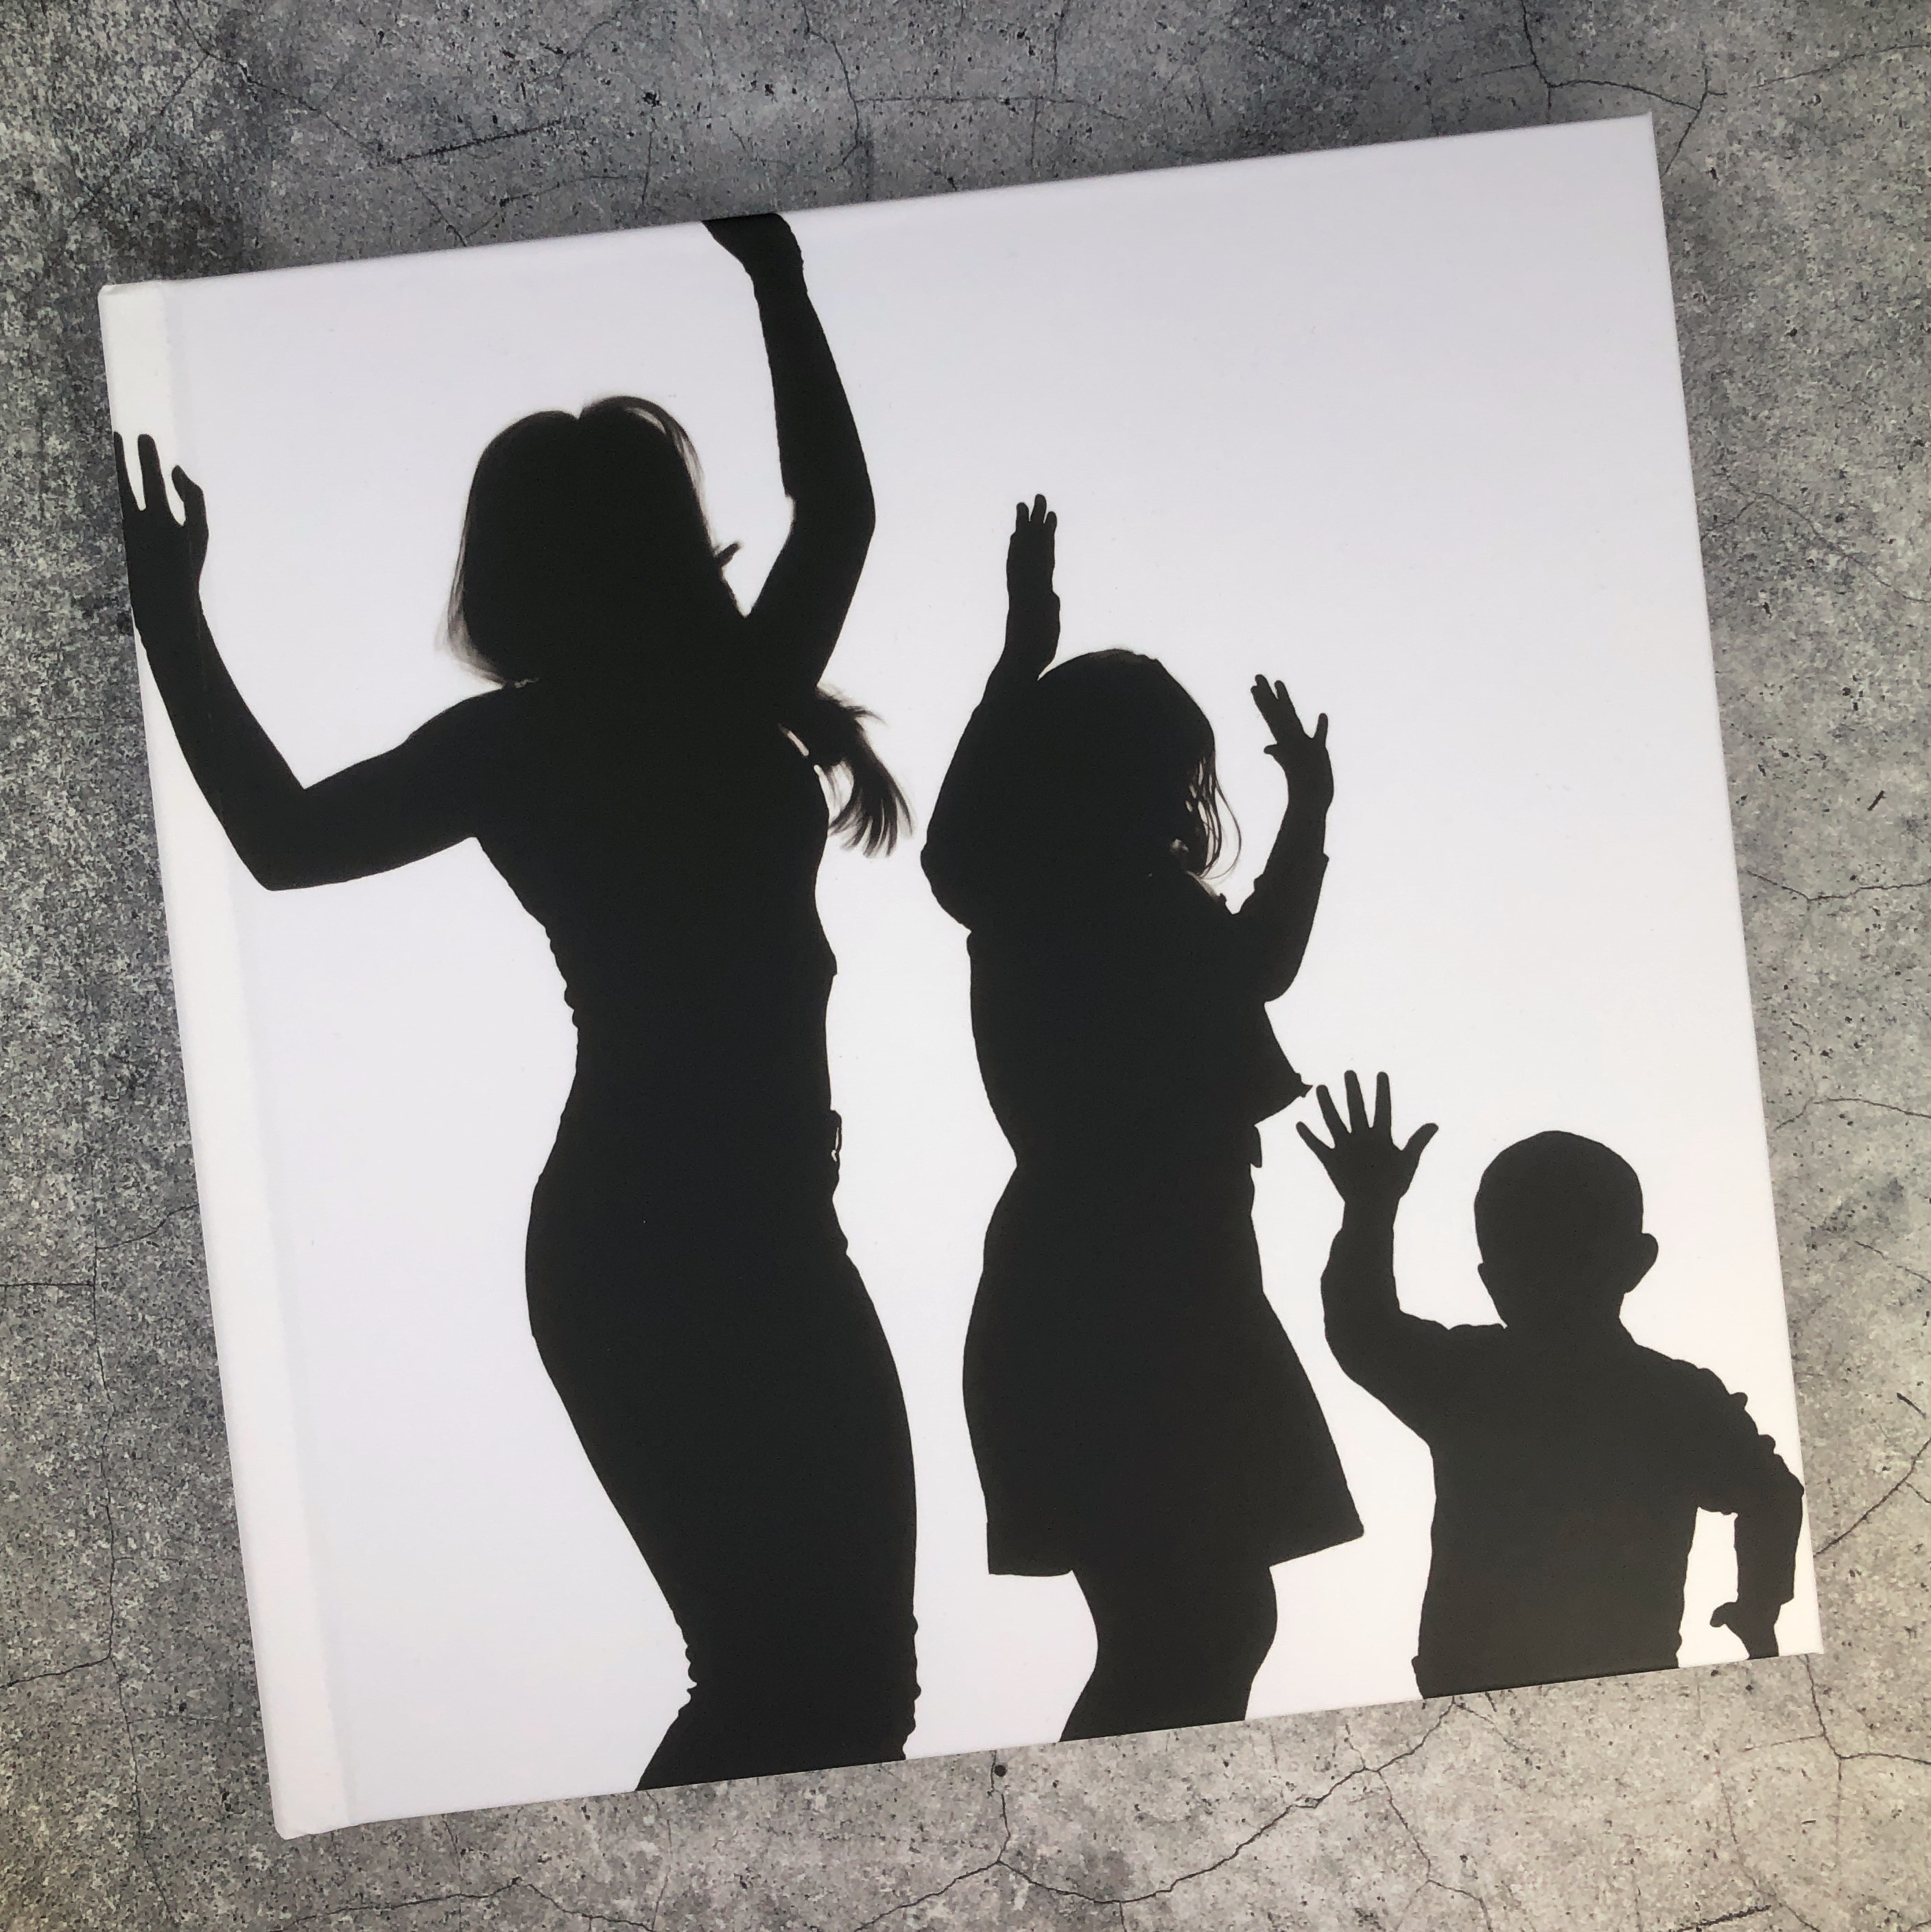 A white celebration book with silhouettes on the cover, sitting on a stone surface.